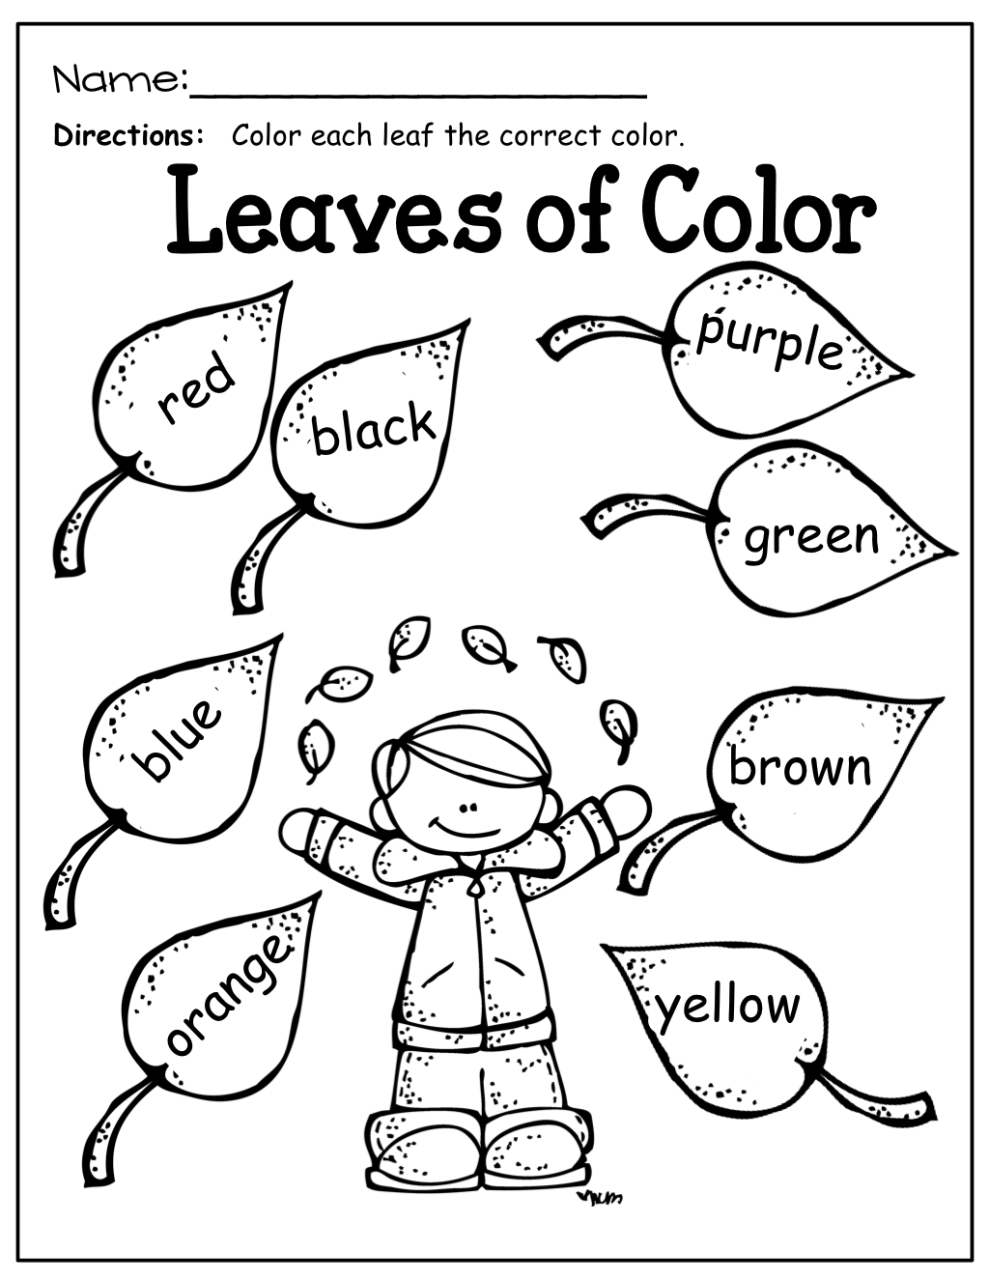 The Mole Coloring Worksheet Answers